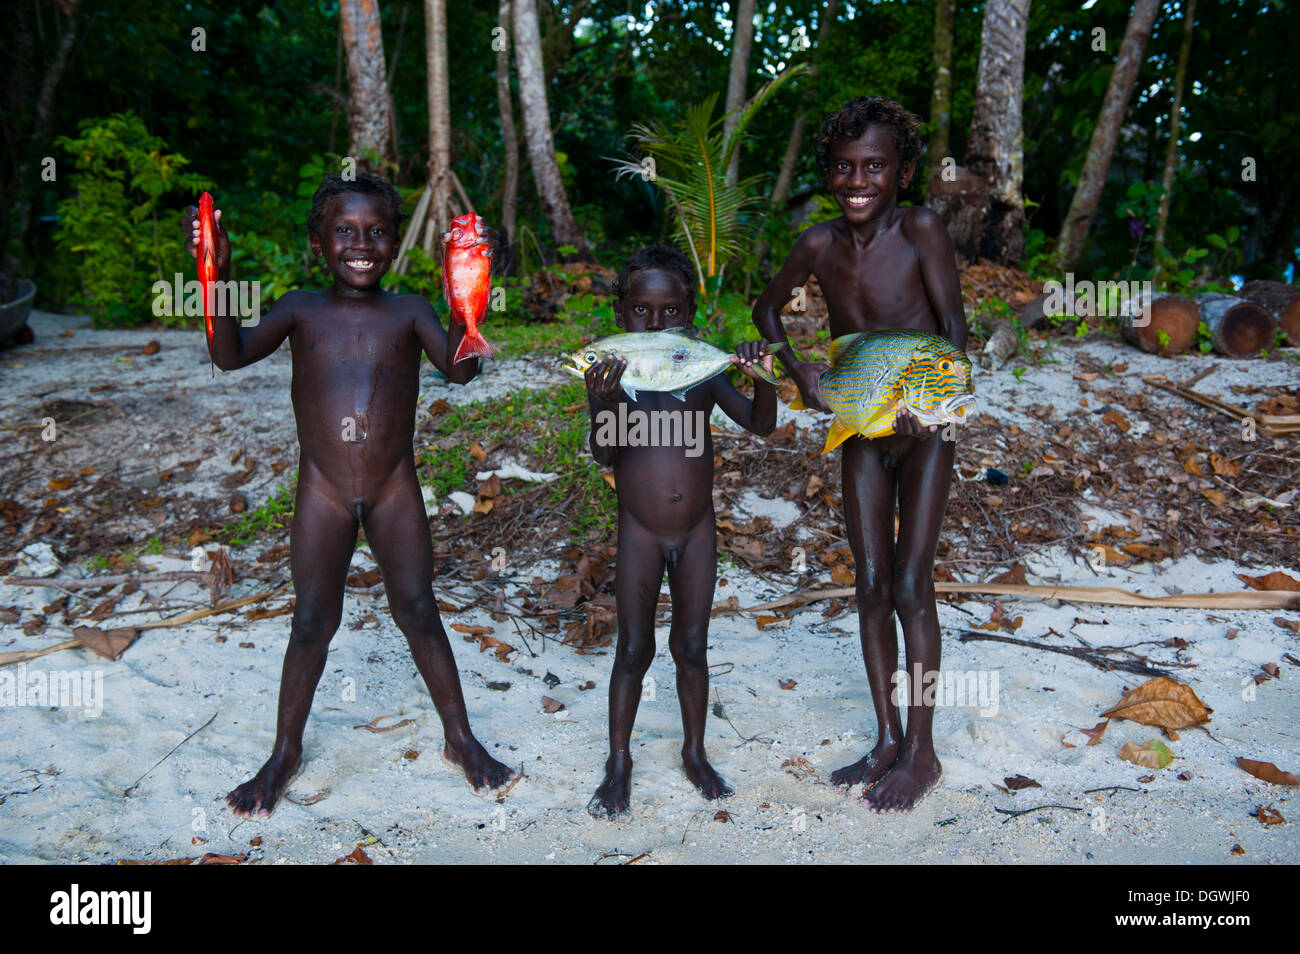 Boys proudly showing the fish they caught, Marovo Lagoon, Western Province, Solomon Islands Stock Photo